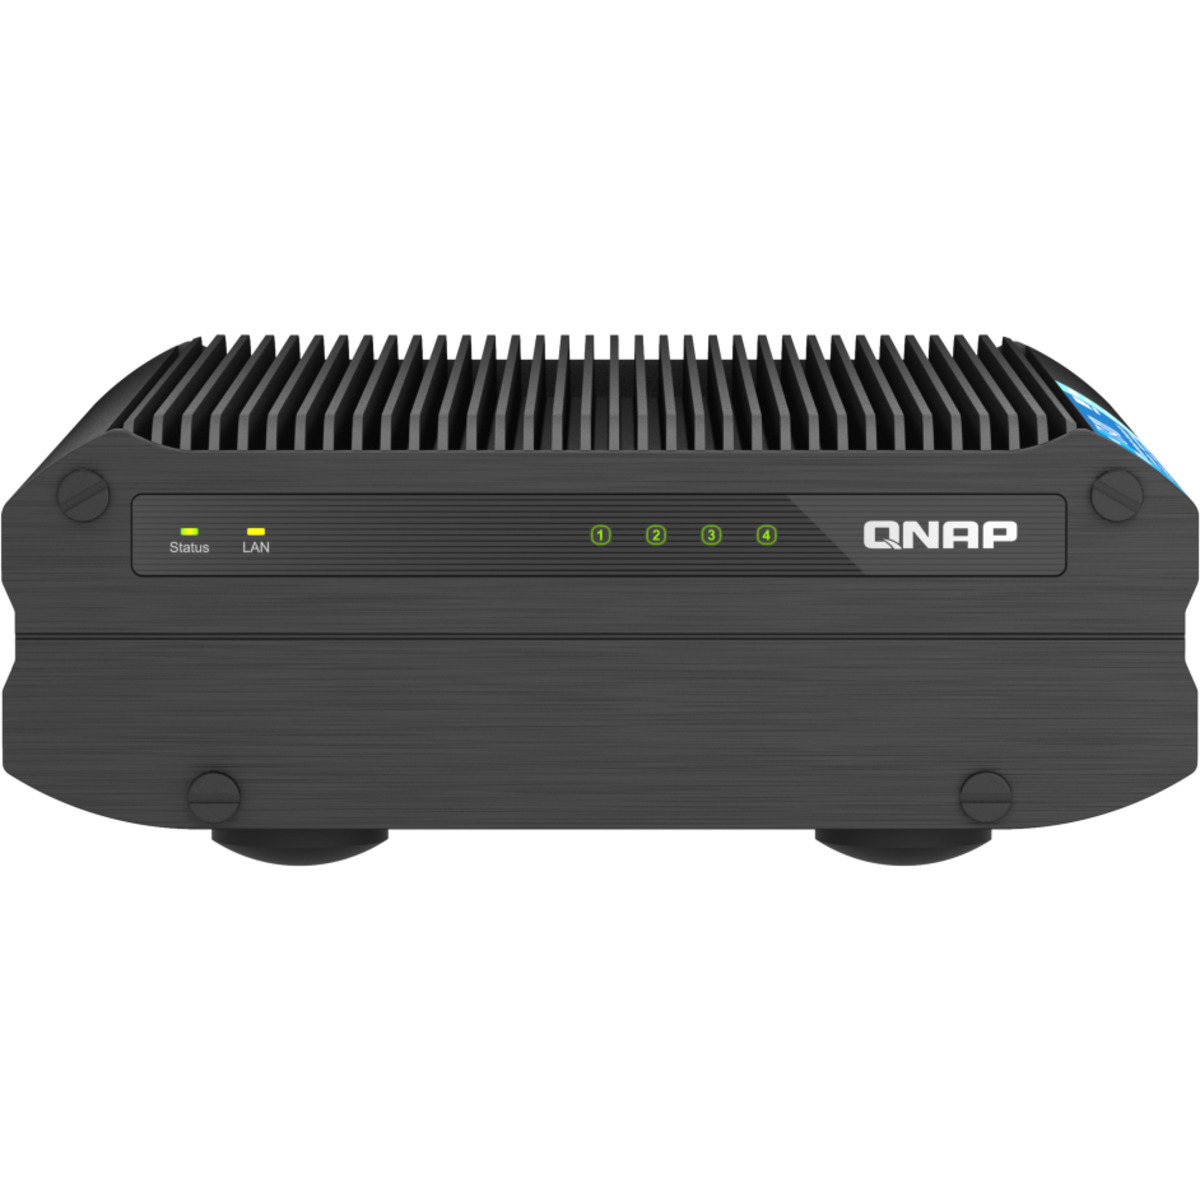 QNAP TS-i410X NAS - Network Attached Storage Device Burn-In Tested Configurations